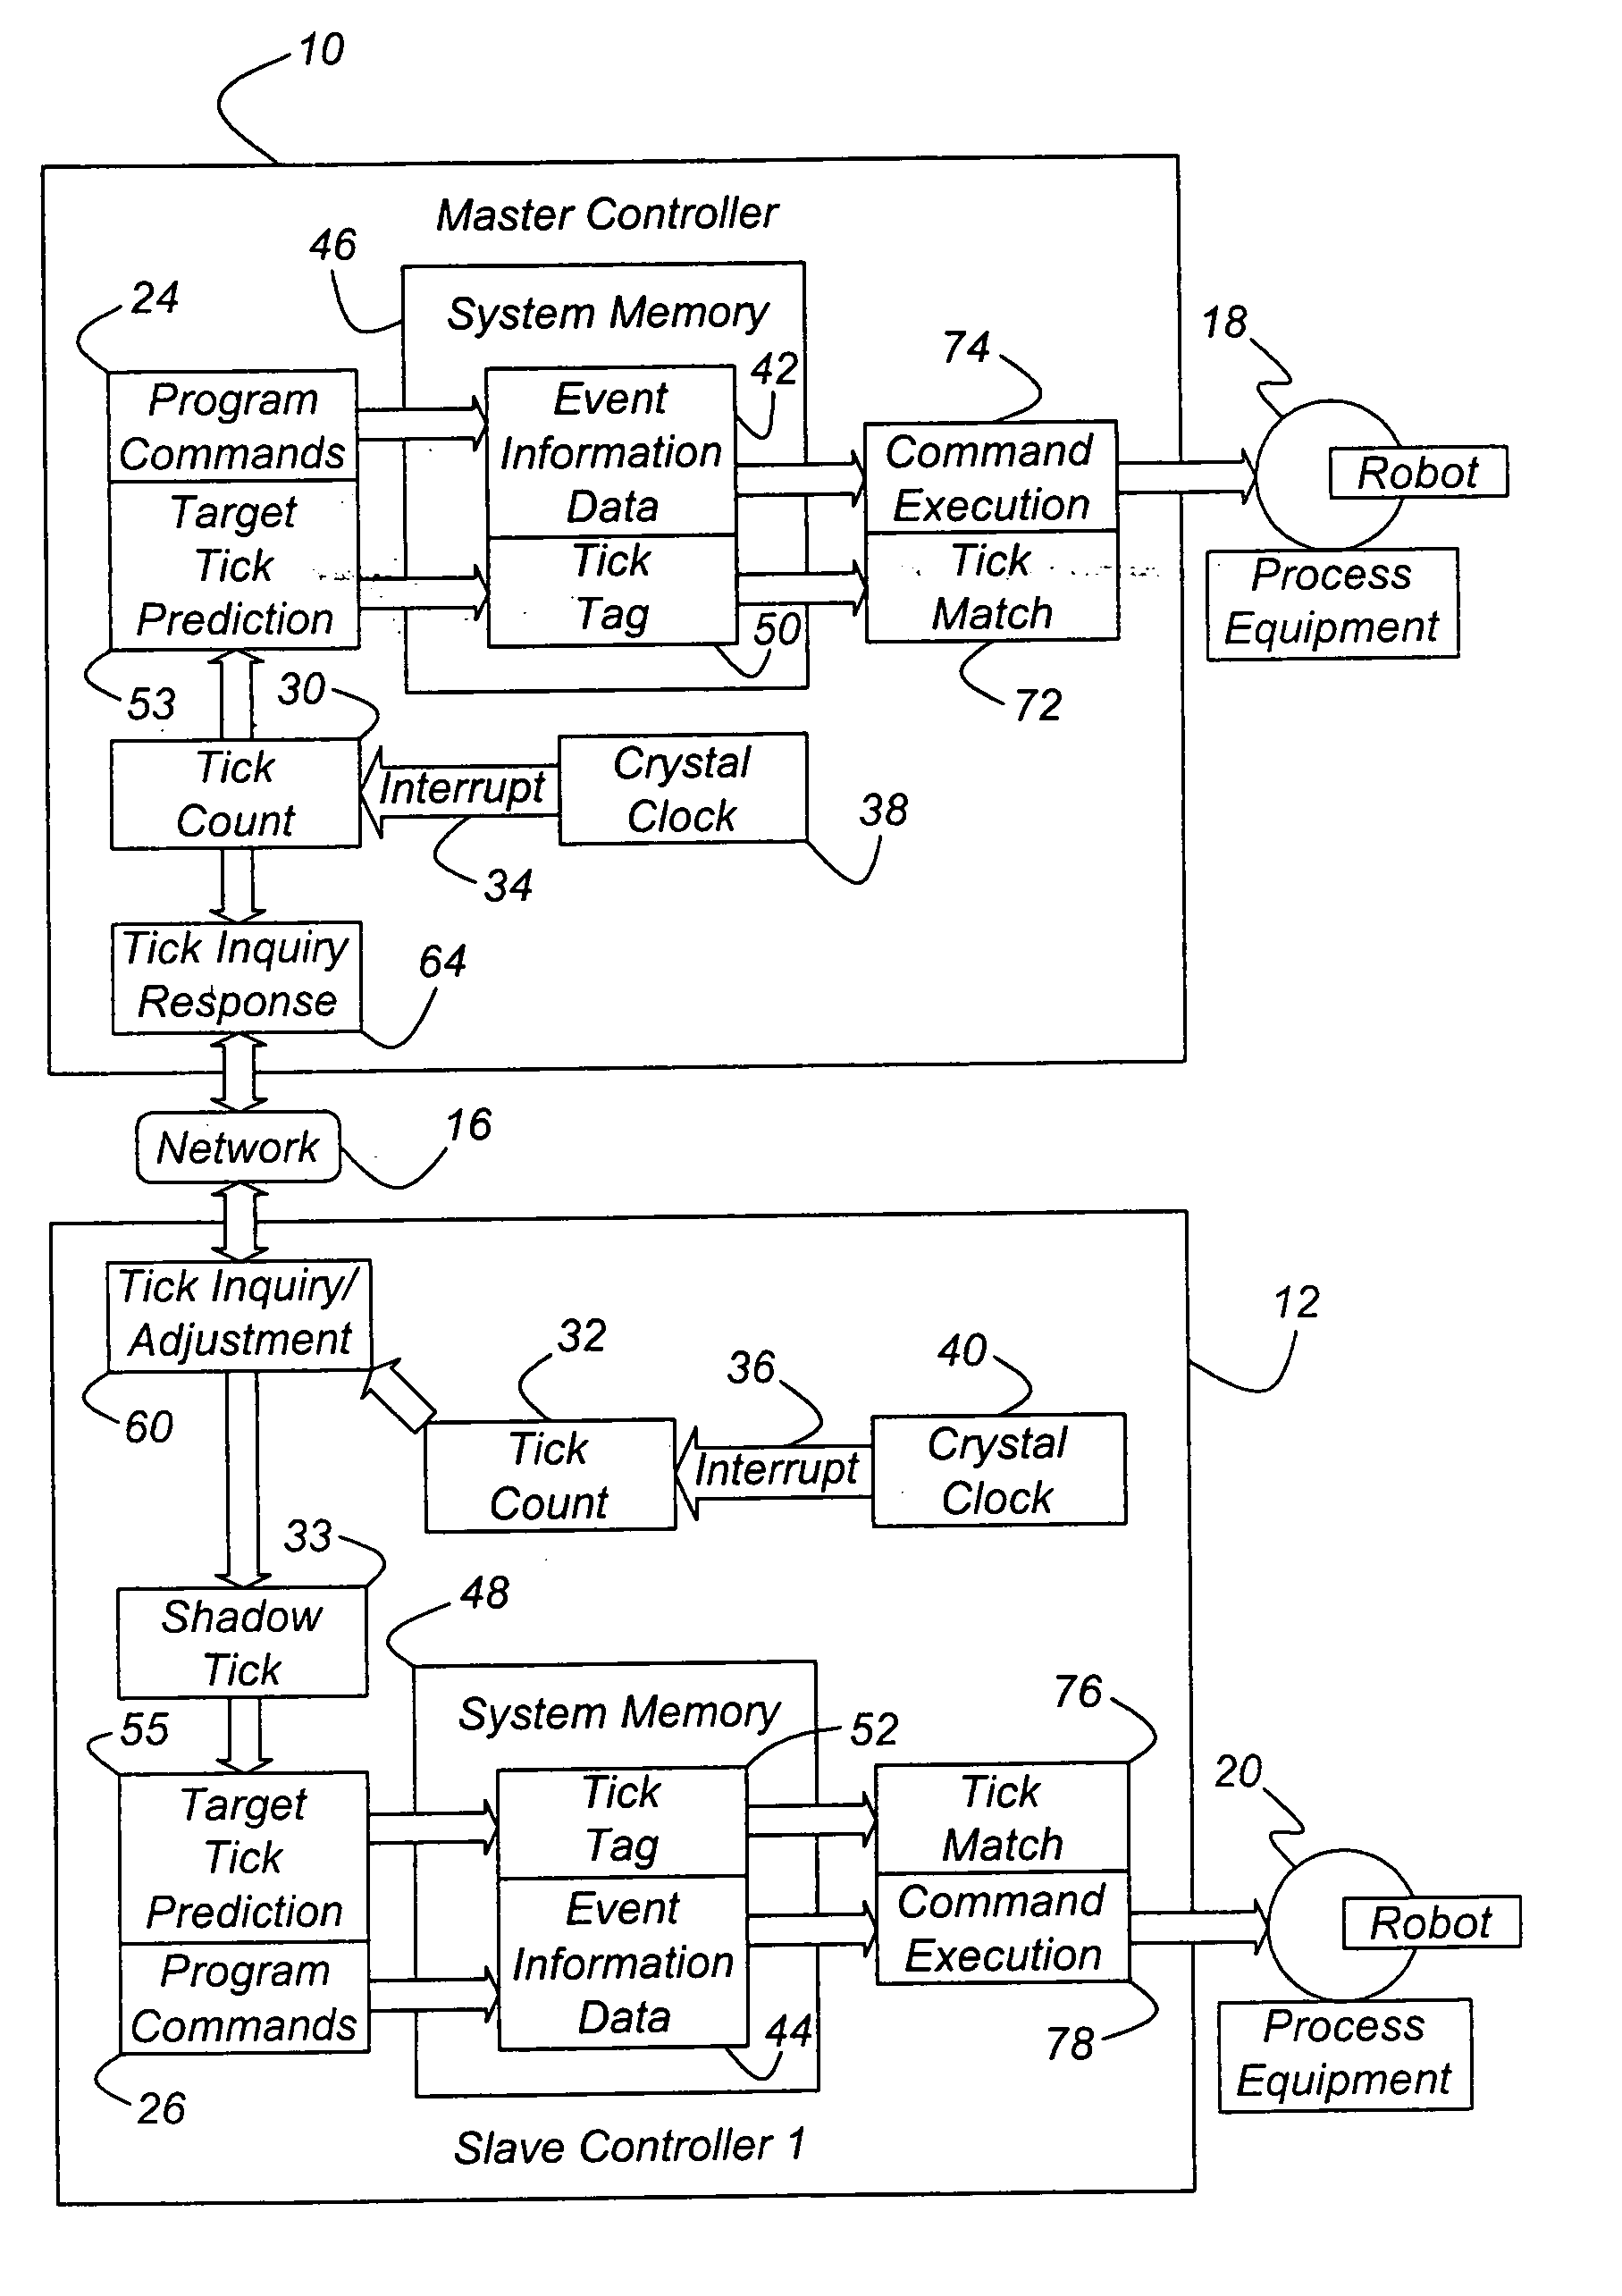 Synchronizing controllers linked by a communications network